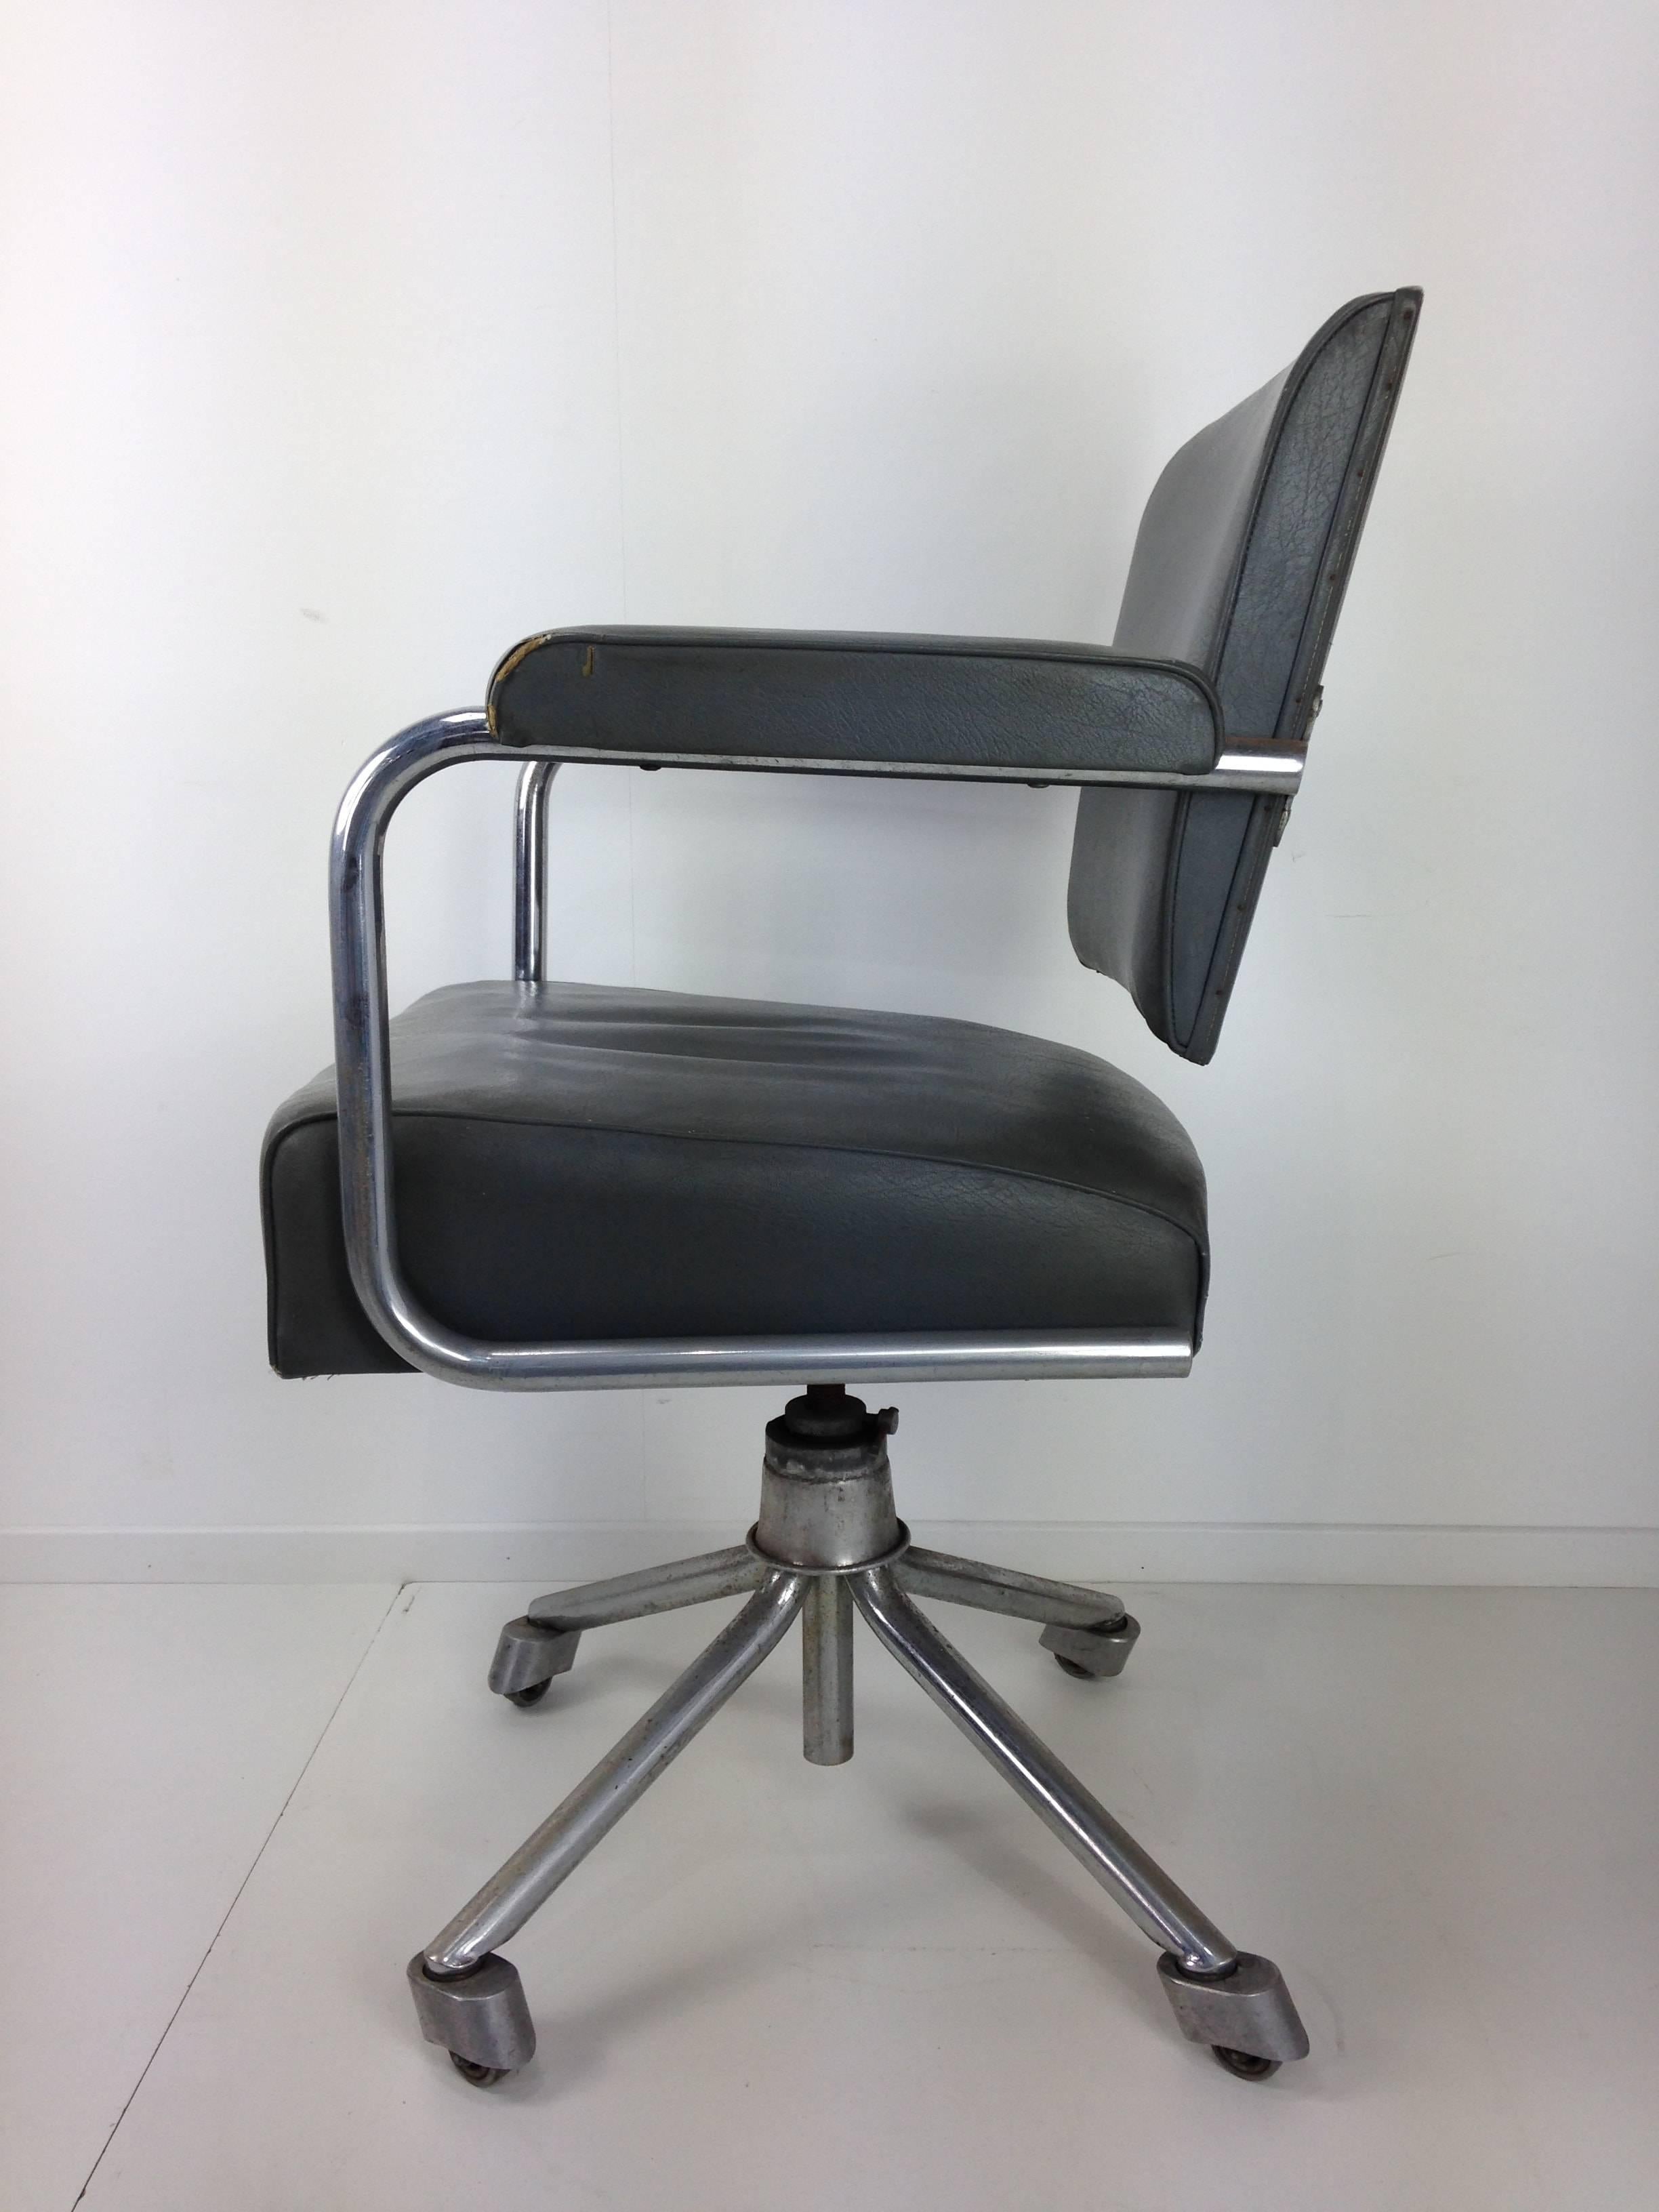 French Design and Bauhaus Style Office and Swivel Armchair 1